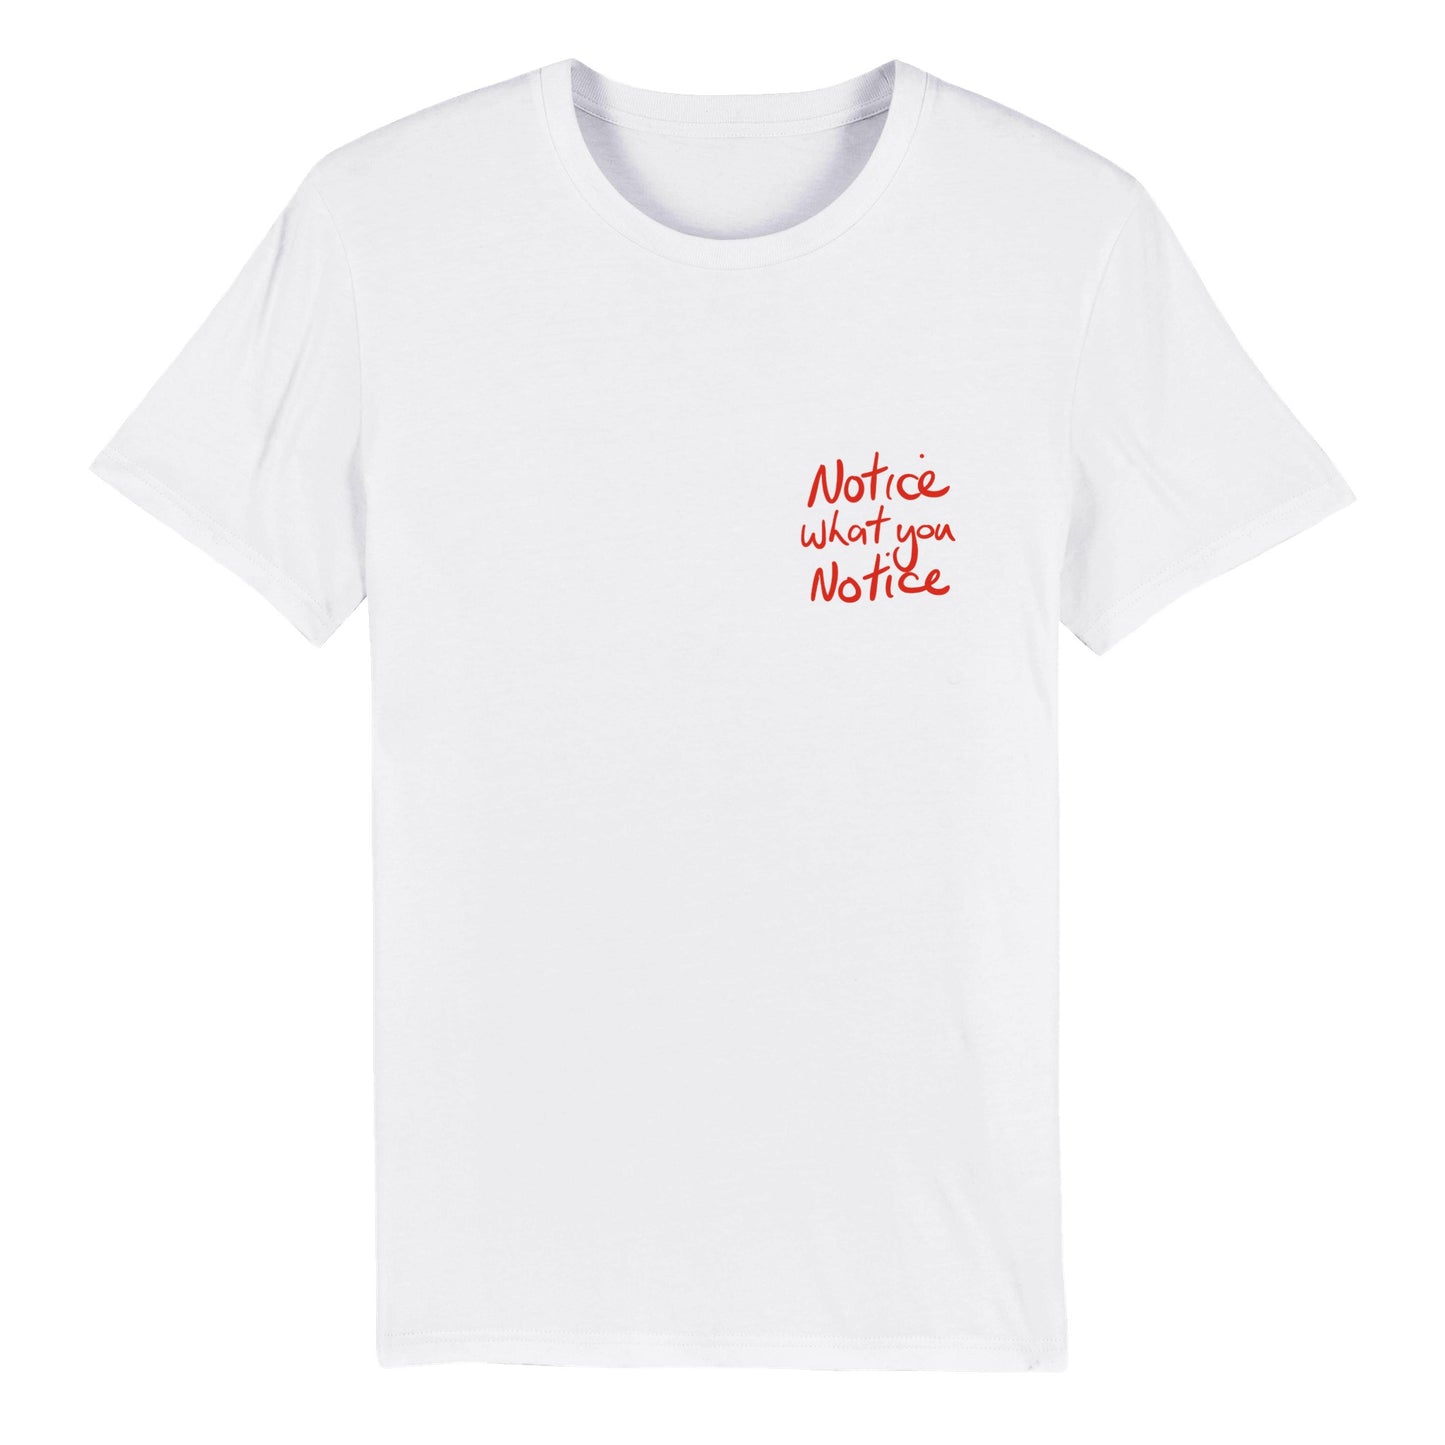 'Notice what you notice' Red on white Organic Unisex Crewneck T-shirt pocket print. Free Shipping.